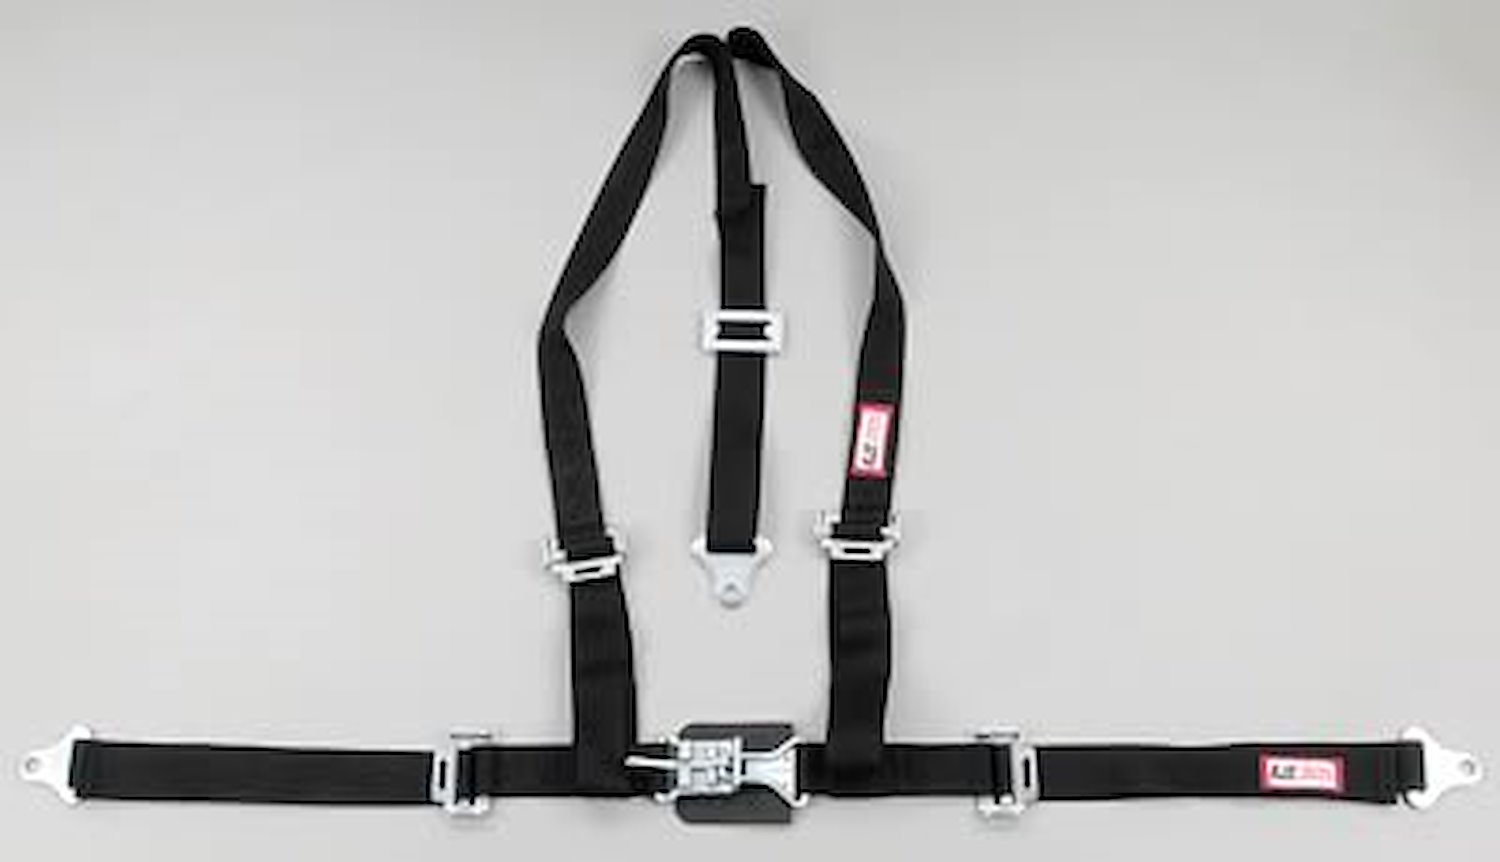 NON-SFI L&L HARNESS 3 PULL UP Lap BELT SNAP SEWN IN 2 S.H. Y FLOOR Mount WRAP/SNAP BLUE